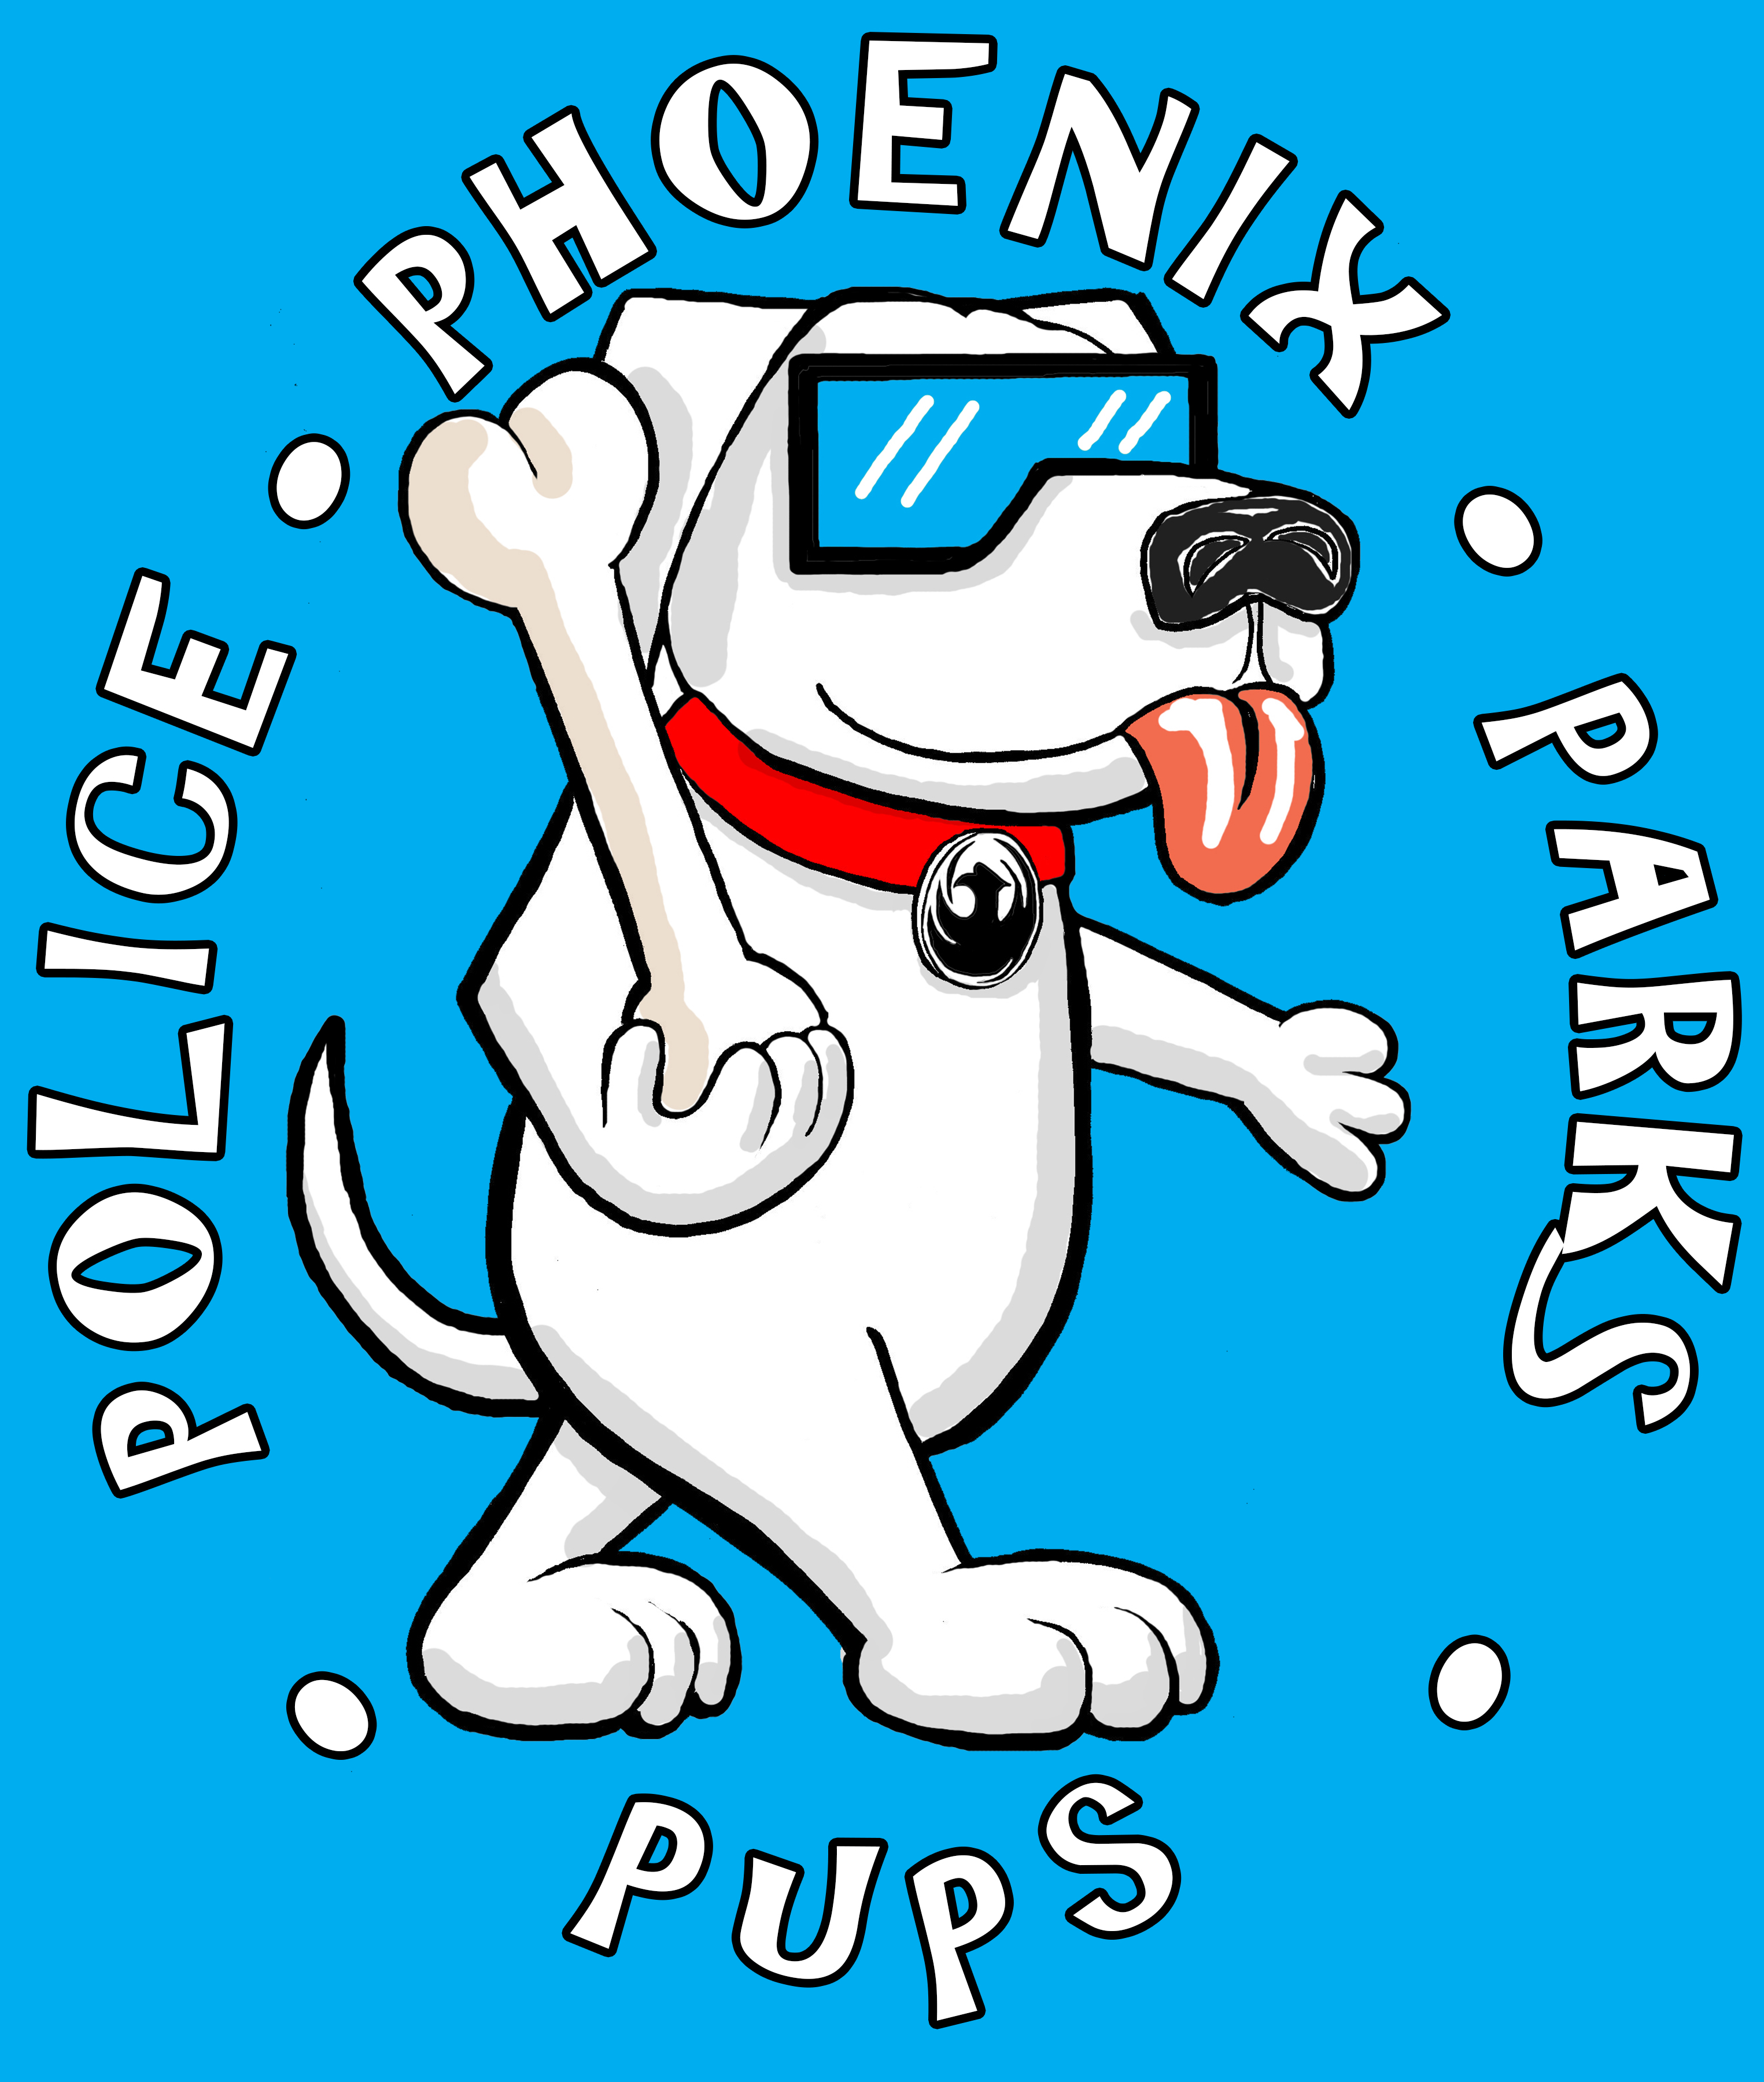 Phoenix Police and Parks, Pups Festival